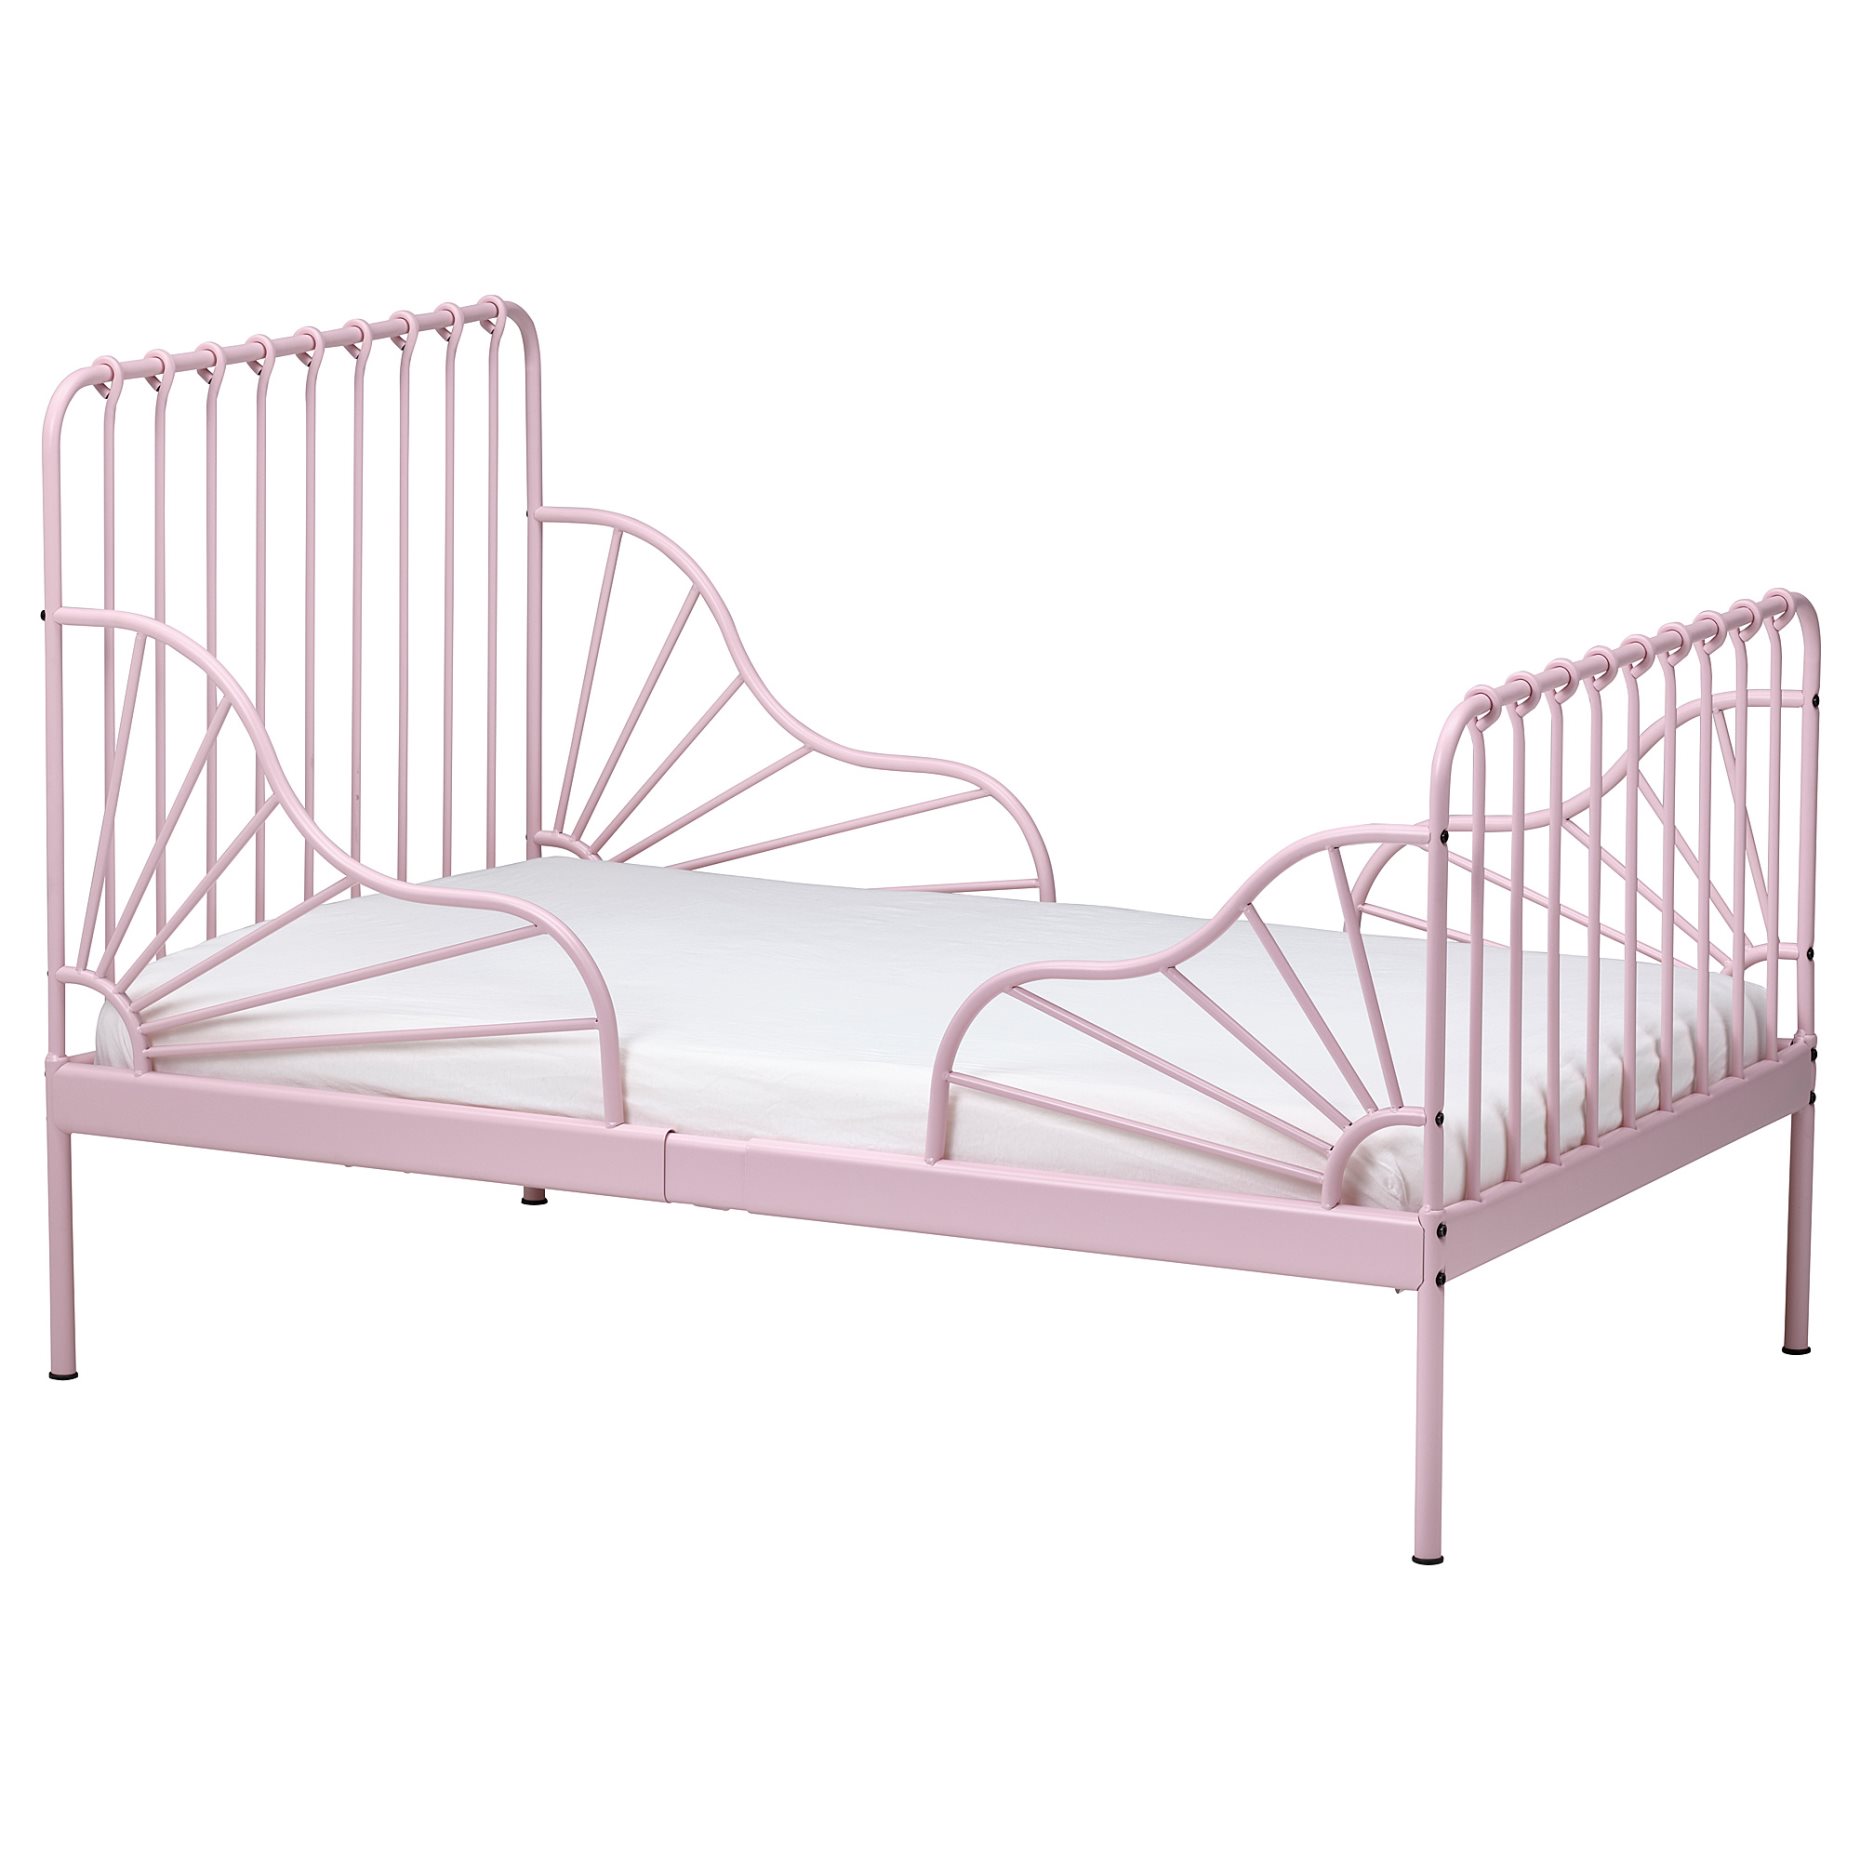 MINNEN, extendable bed frame with slatted bed base, 80x200 cm, 794.188.06